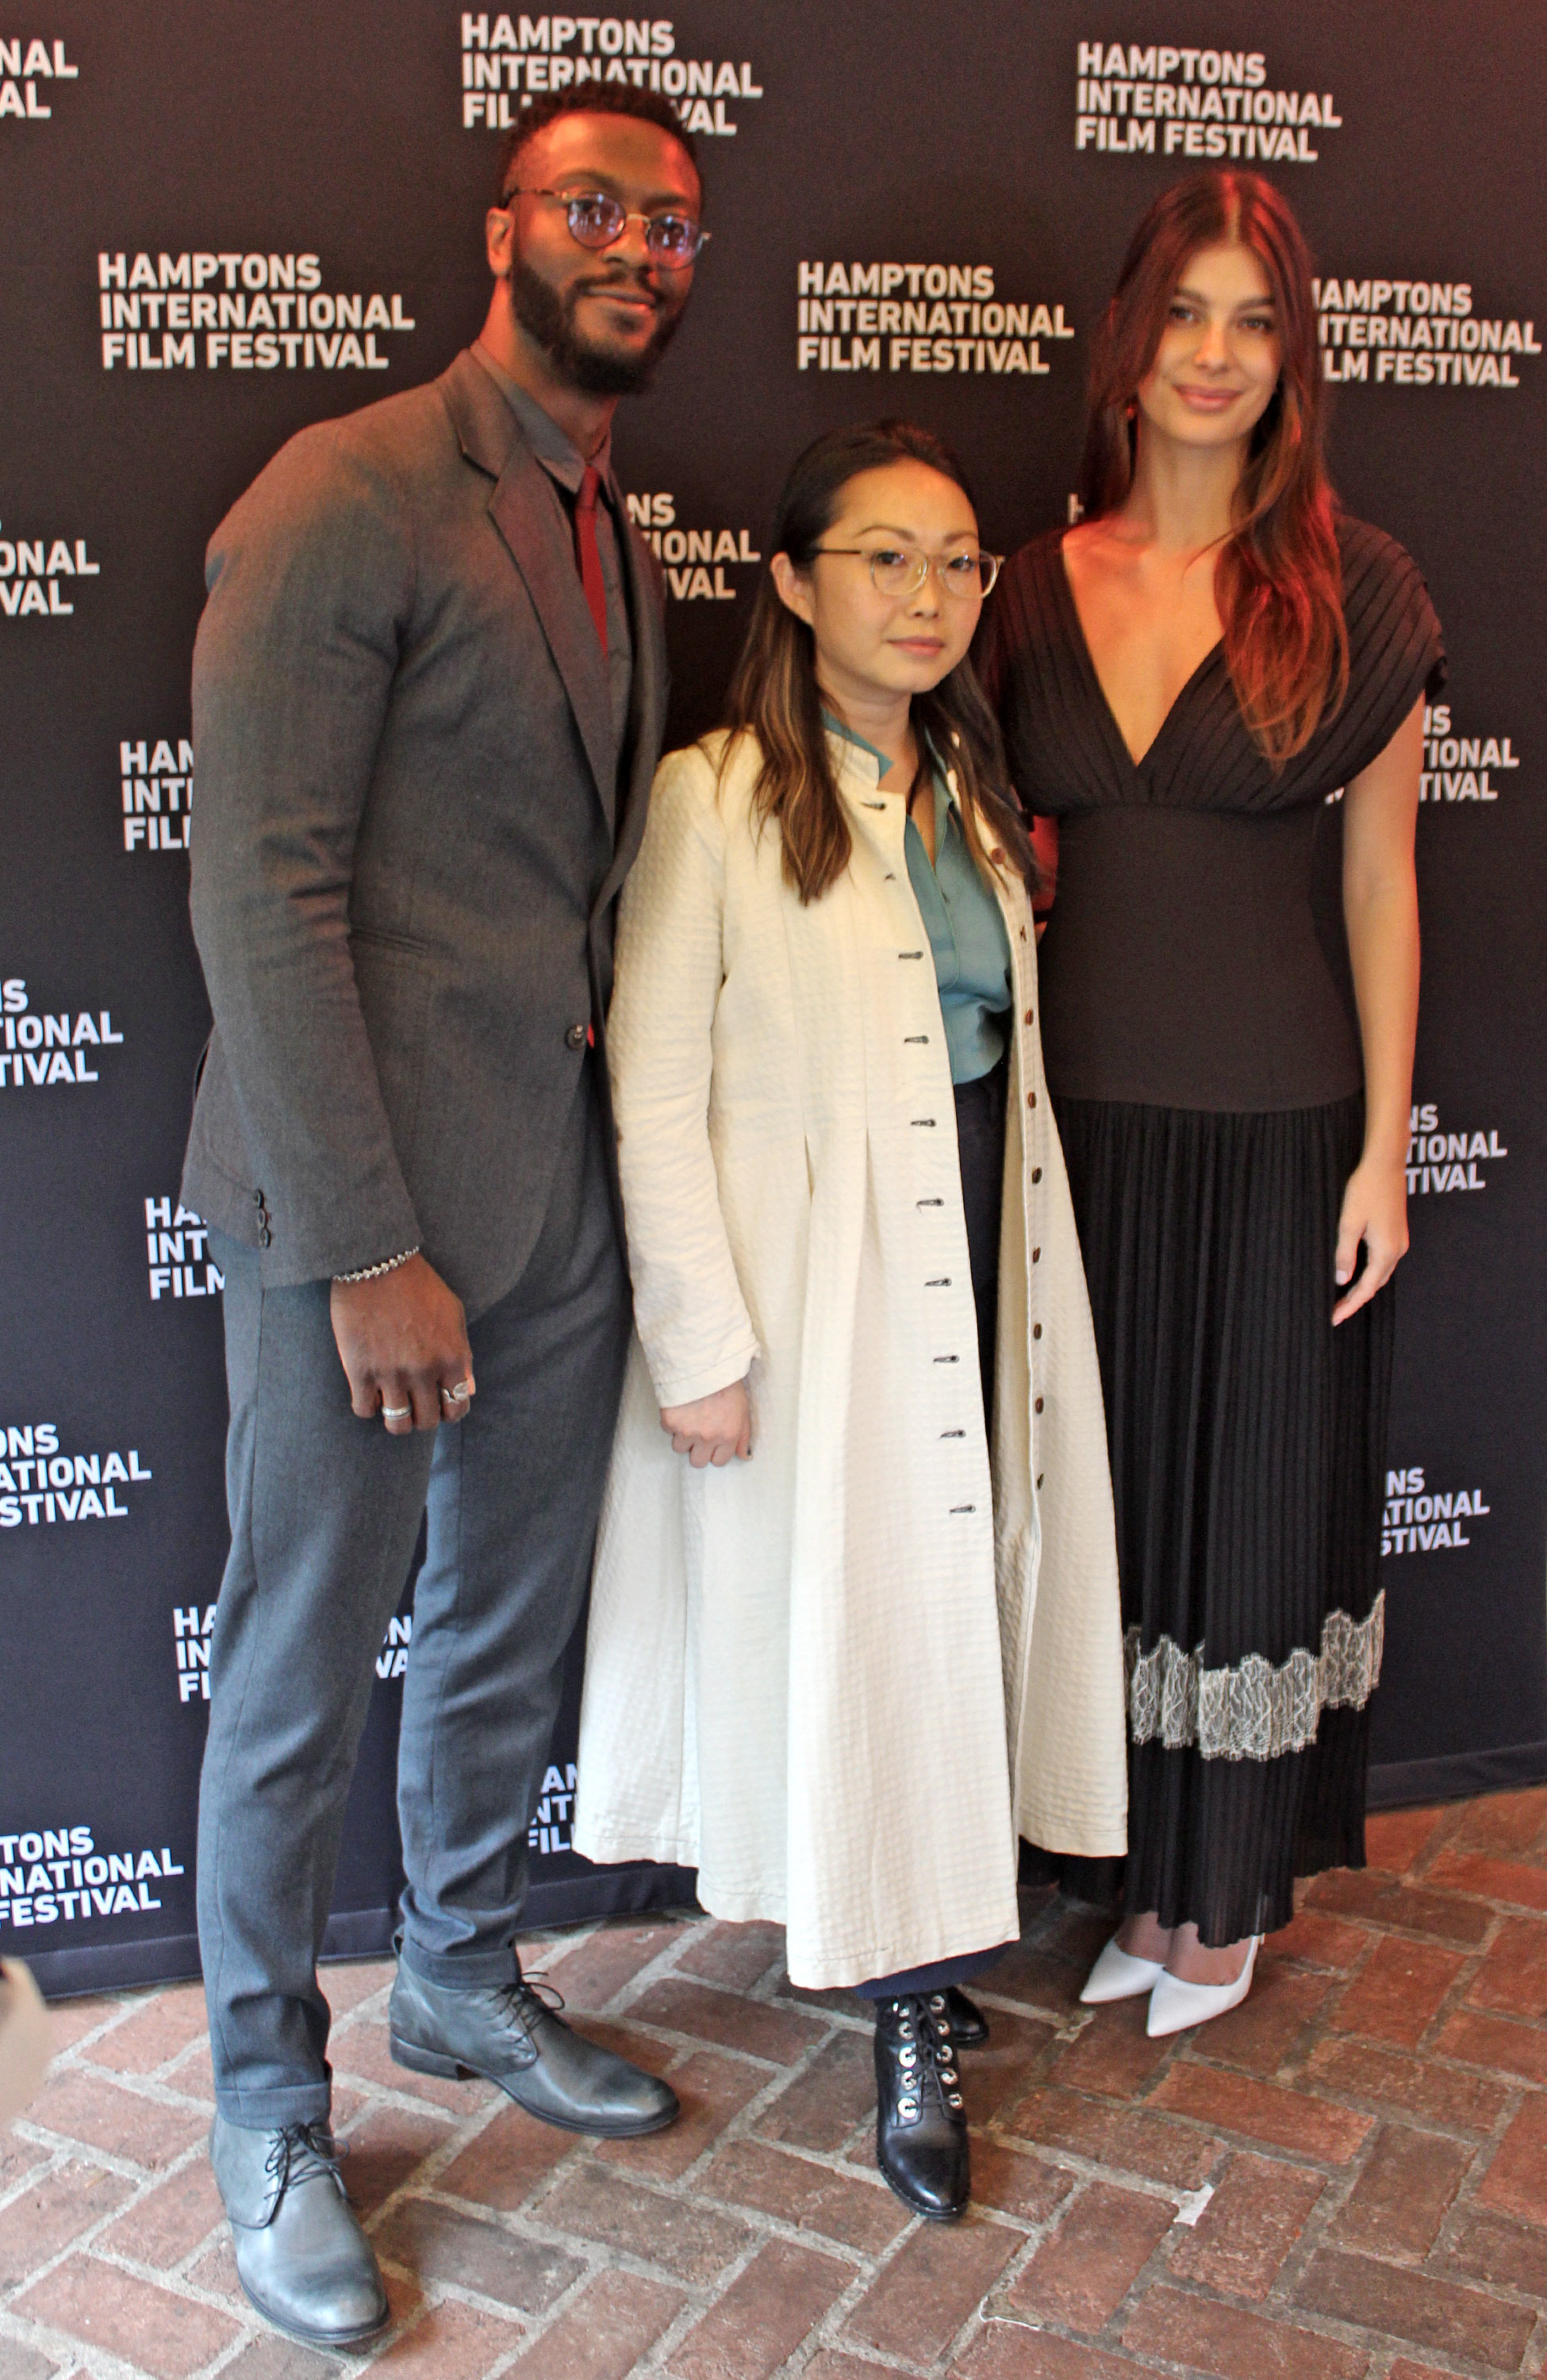 HIFF 2019 Breakthrough Artists, from left, Aldis Hodge, Lulu Wang, and Camilla Marrone.